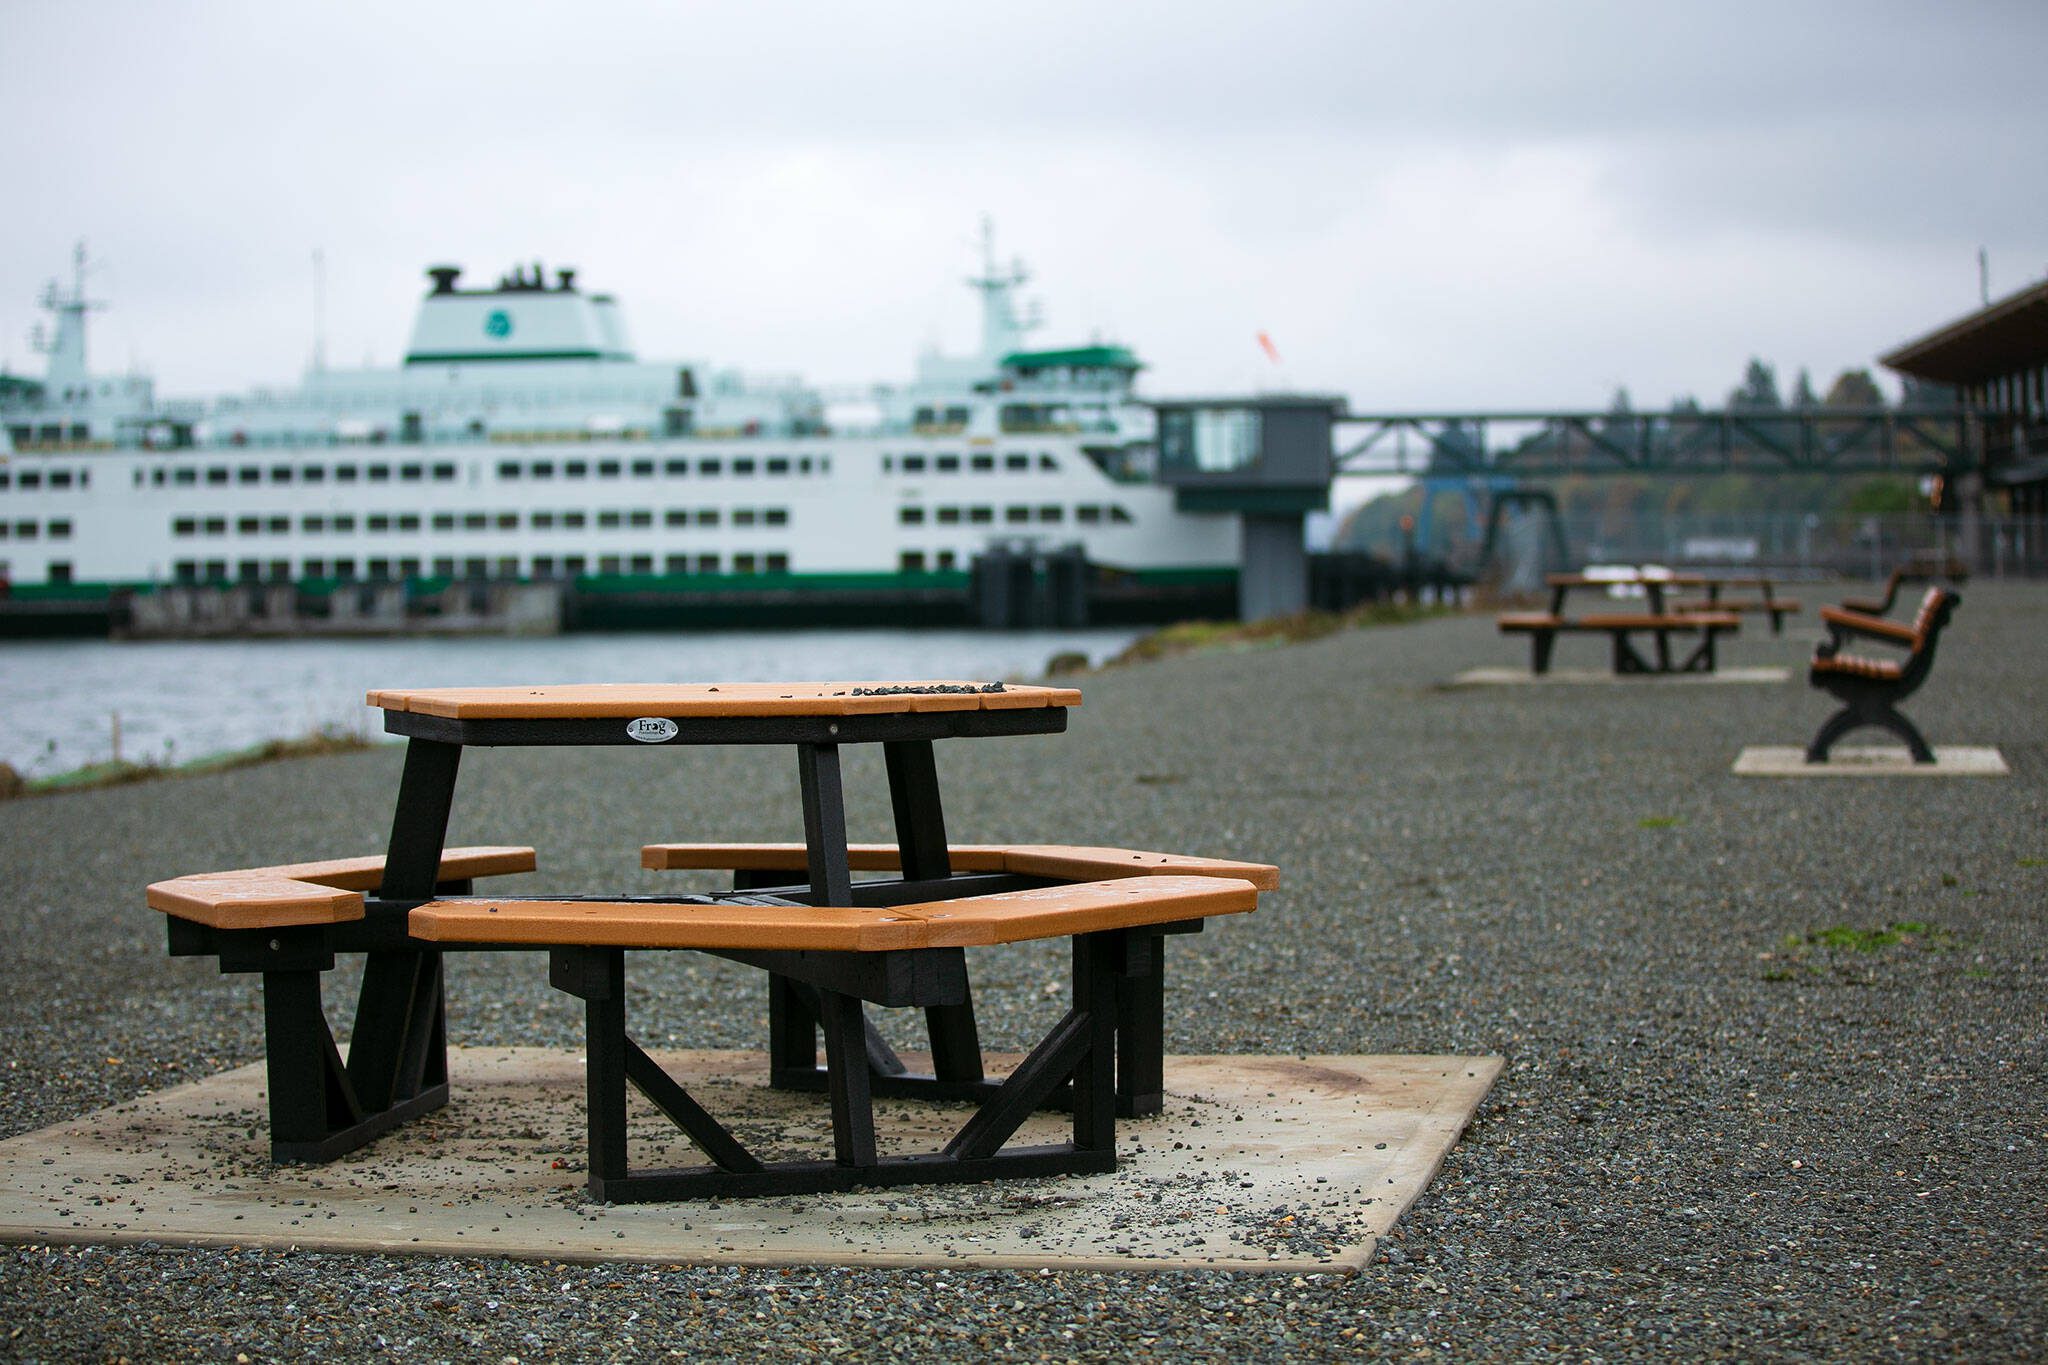 New benches and tables line the waterfront at a new park near the Mukilteo ferry terminal. (Ryan Berry / The Herald)